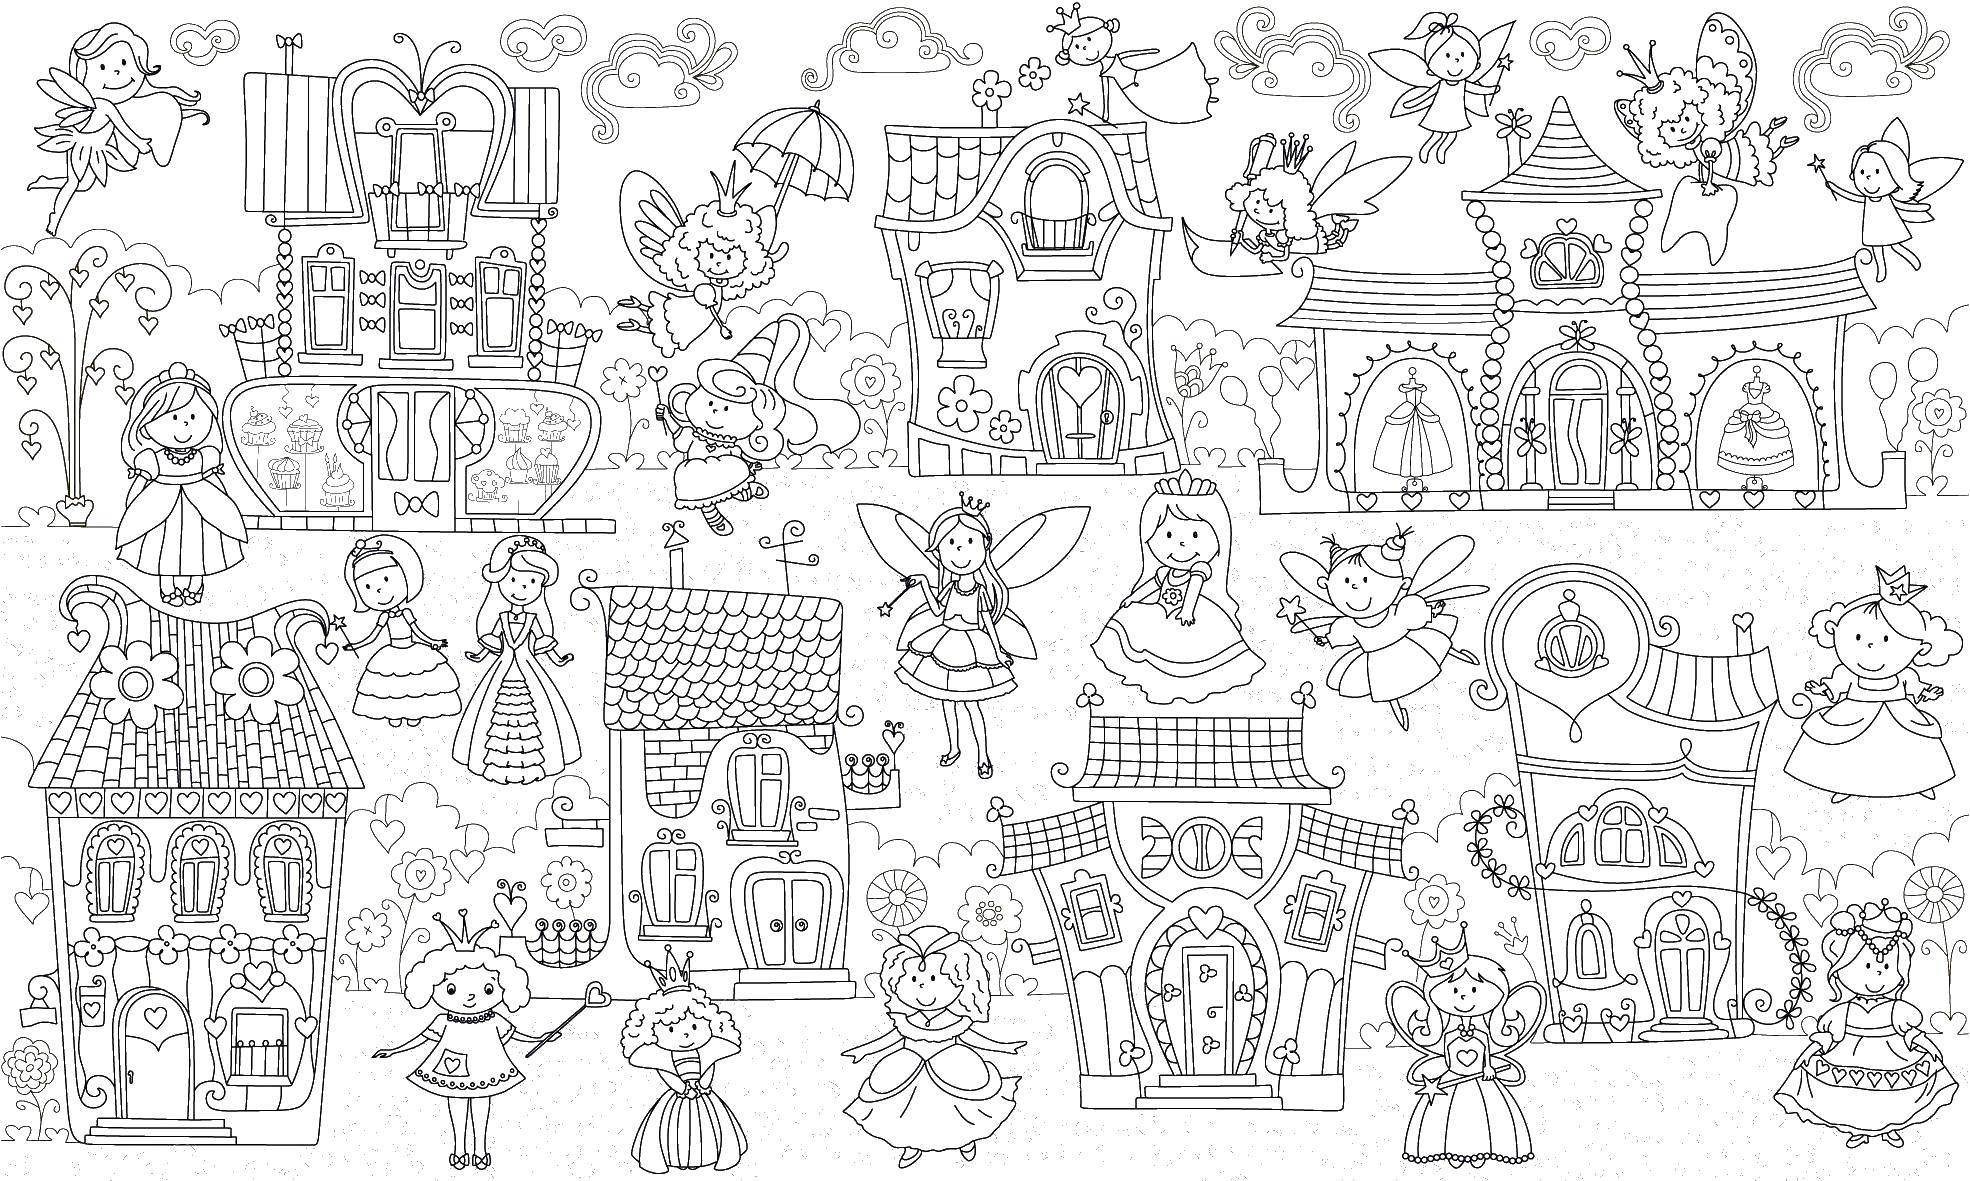 Coloring The town fairies and princesses. Category the city. Tags:  city, fairies, princesses.